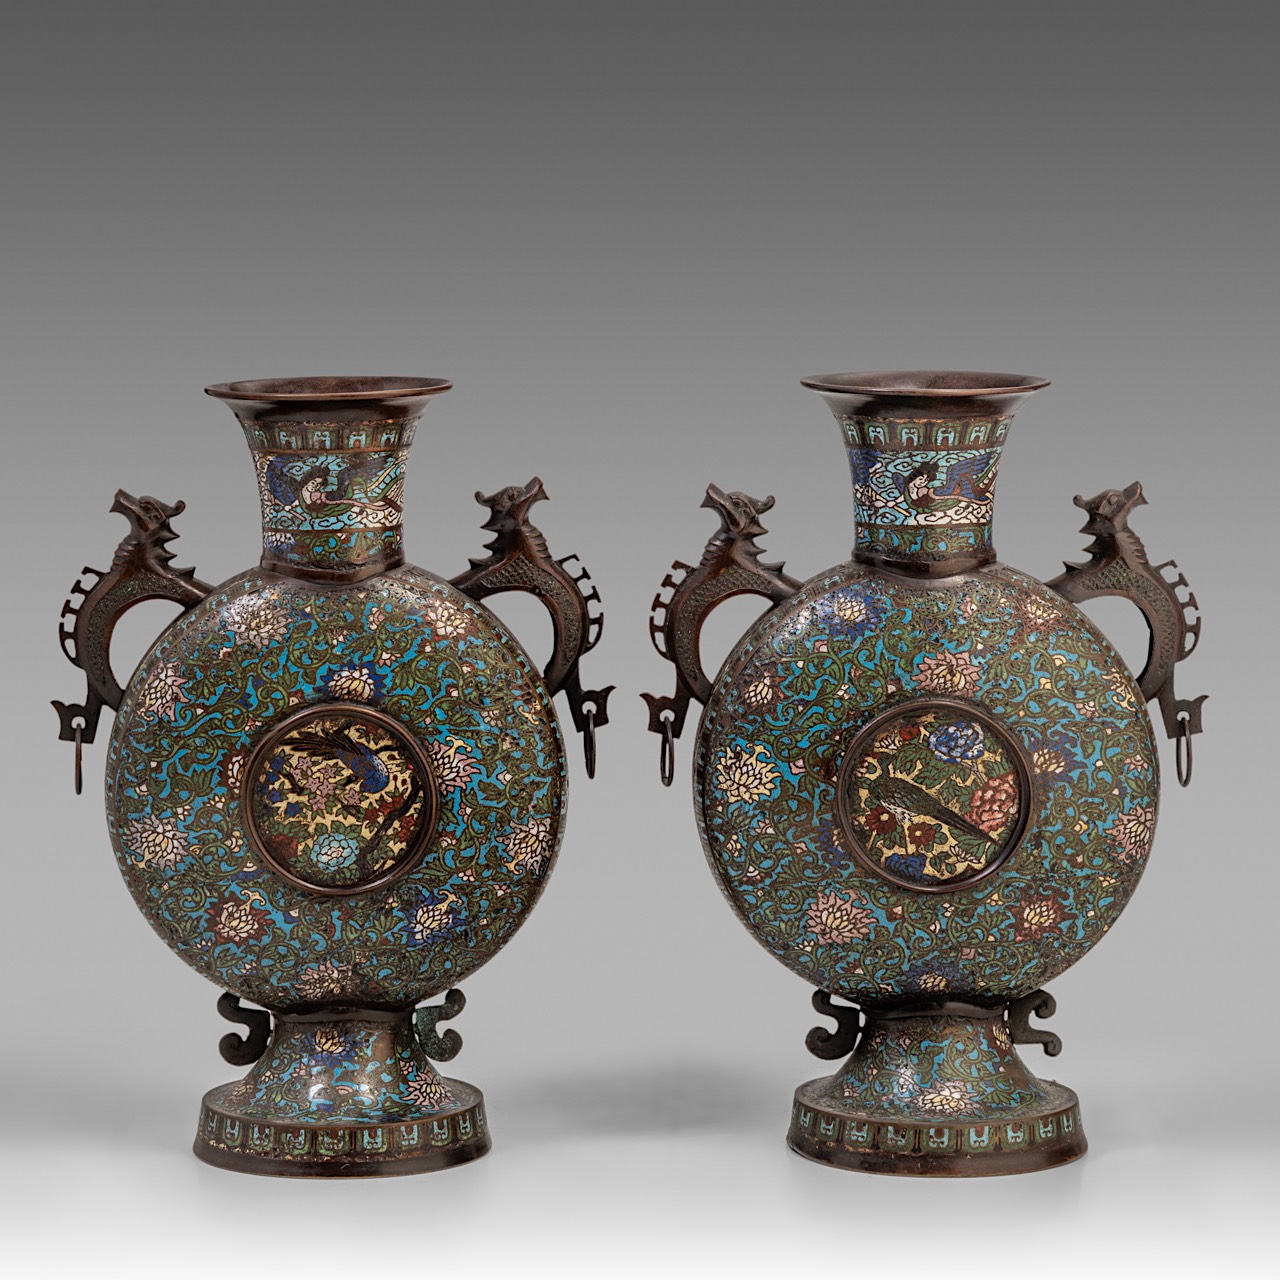 A pair of Japanese champleve enamelled bronze moonflask vases, late Meiji (1868-1912), H 50 cm